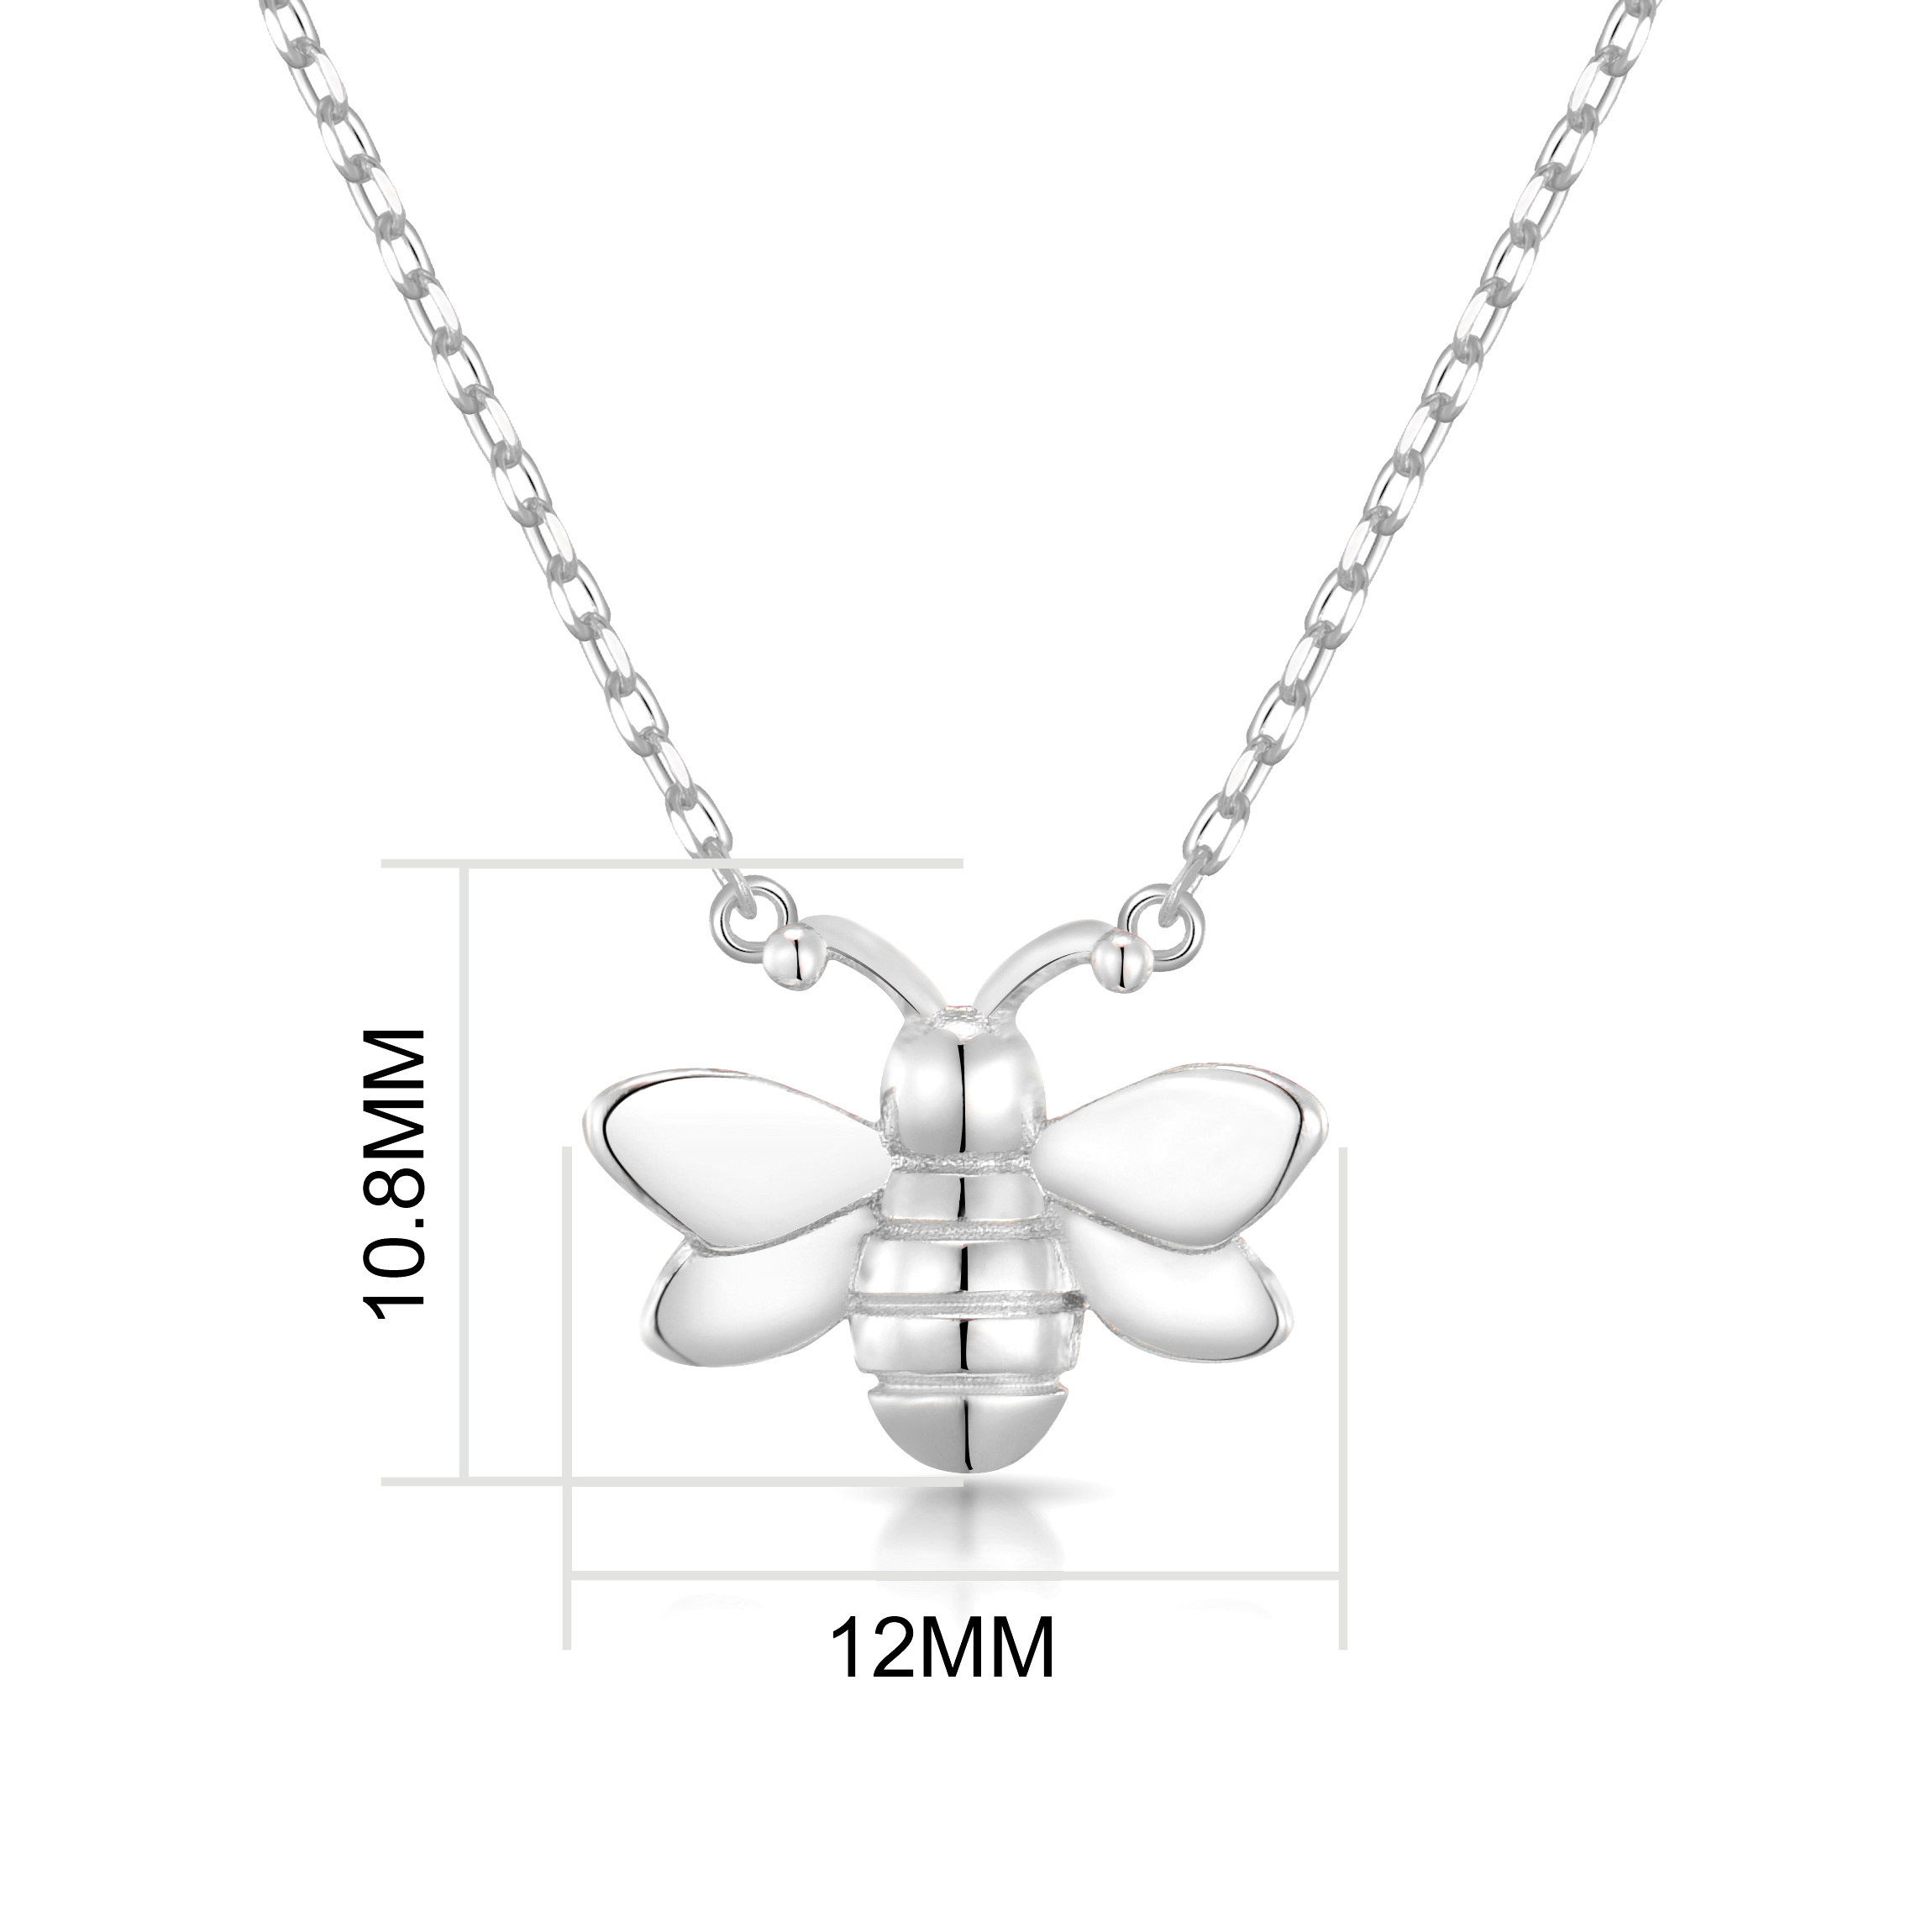 Silver Plated Bumble Bee Necklace